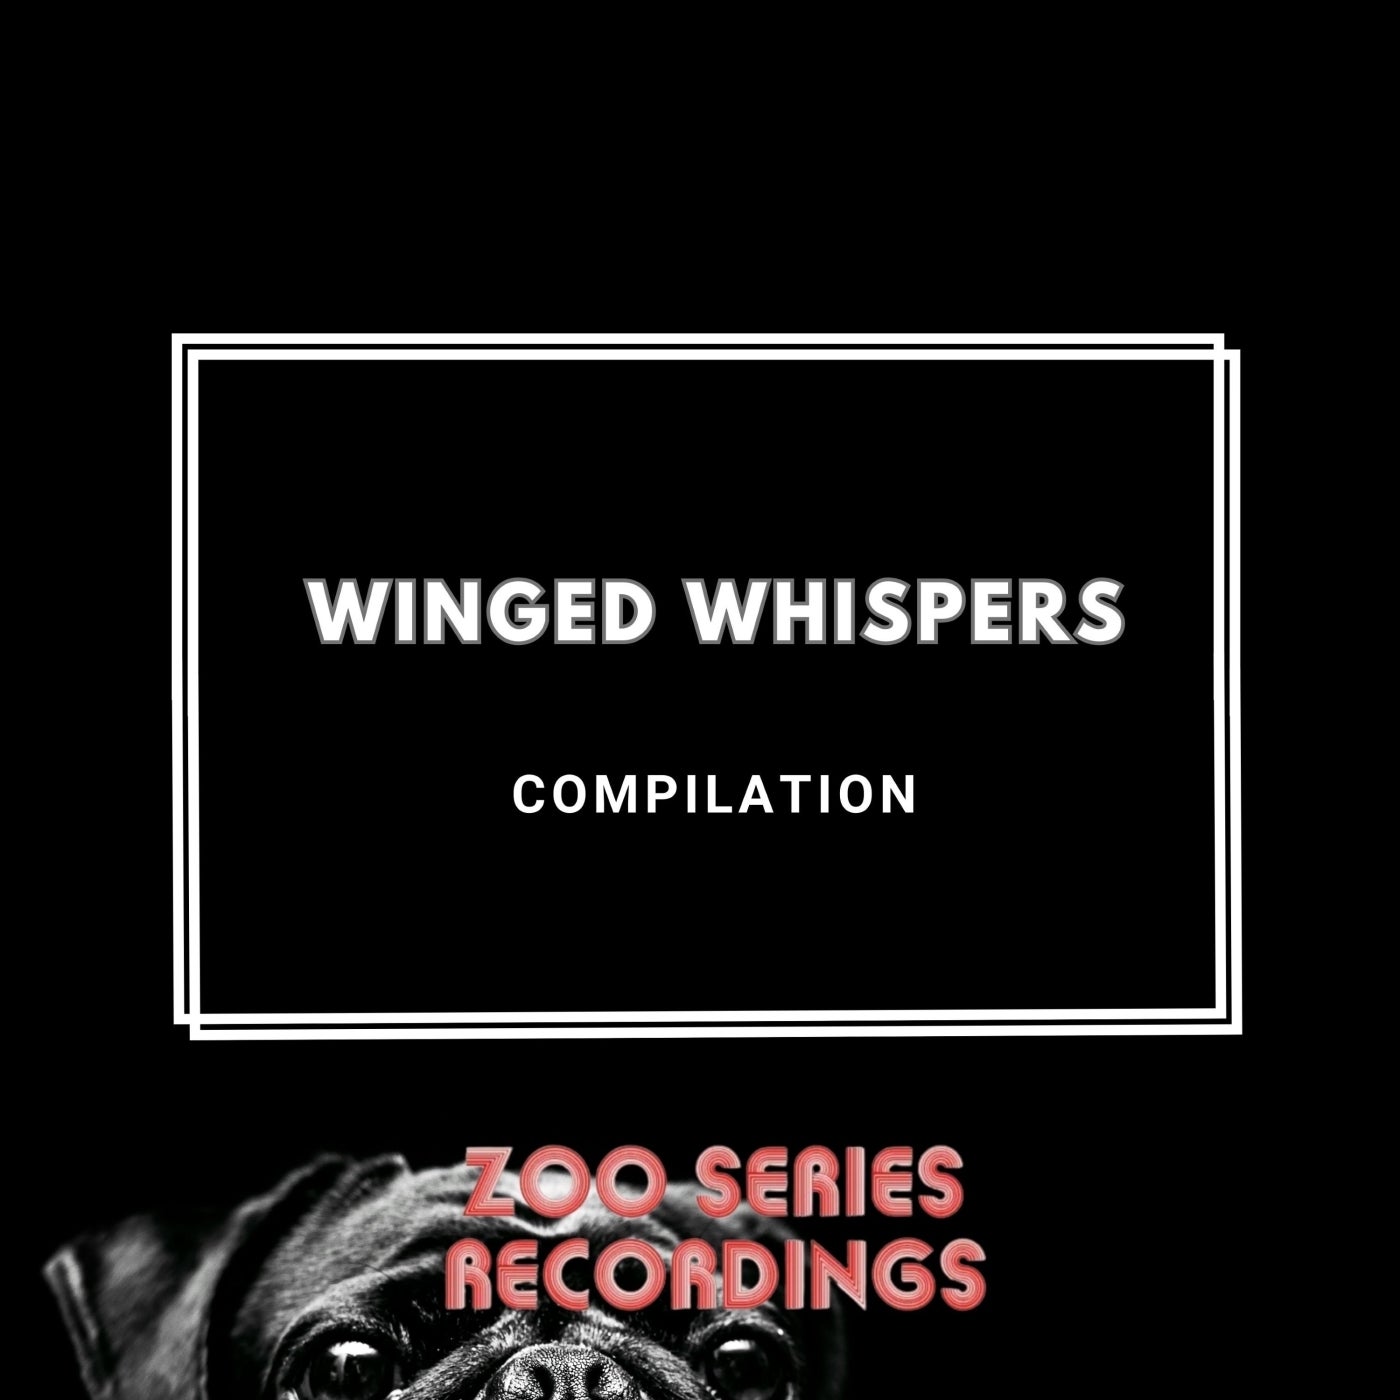 Winged Whispers